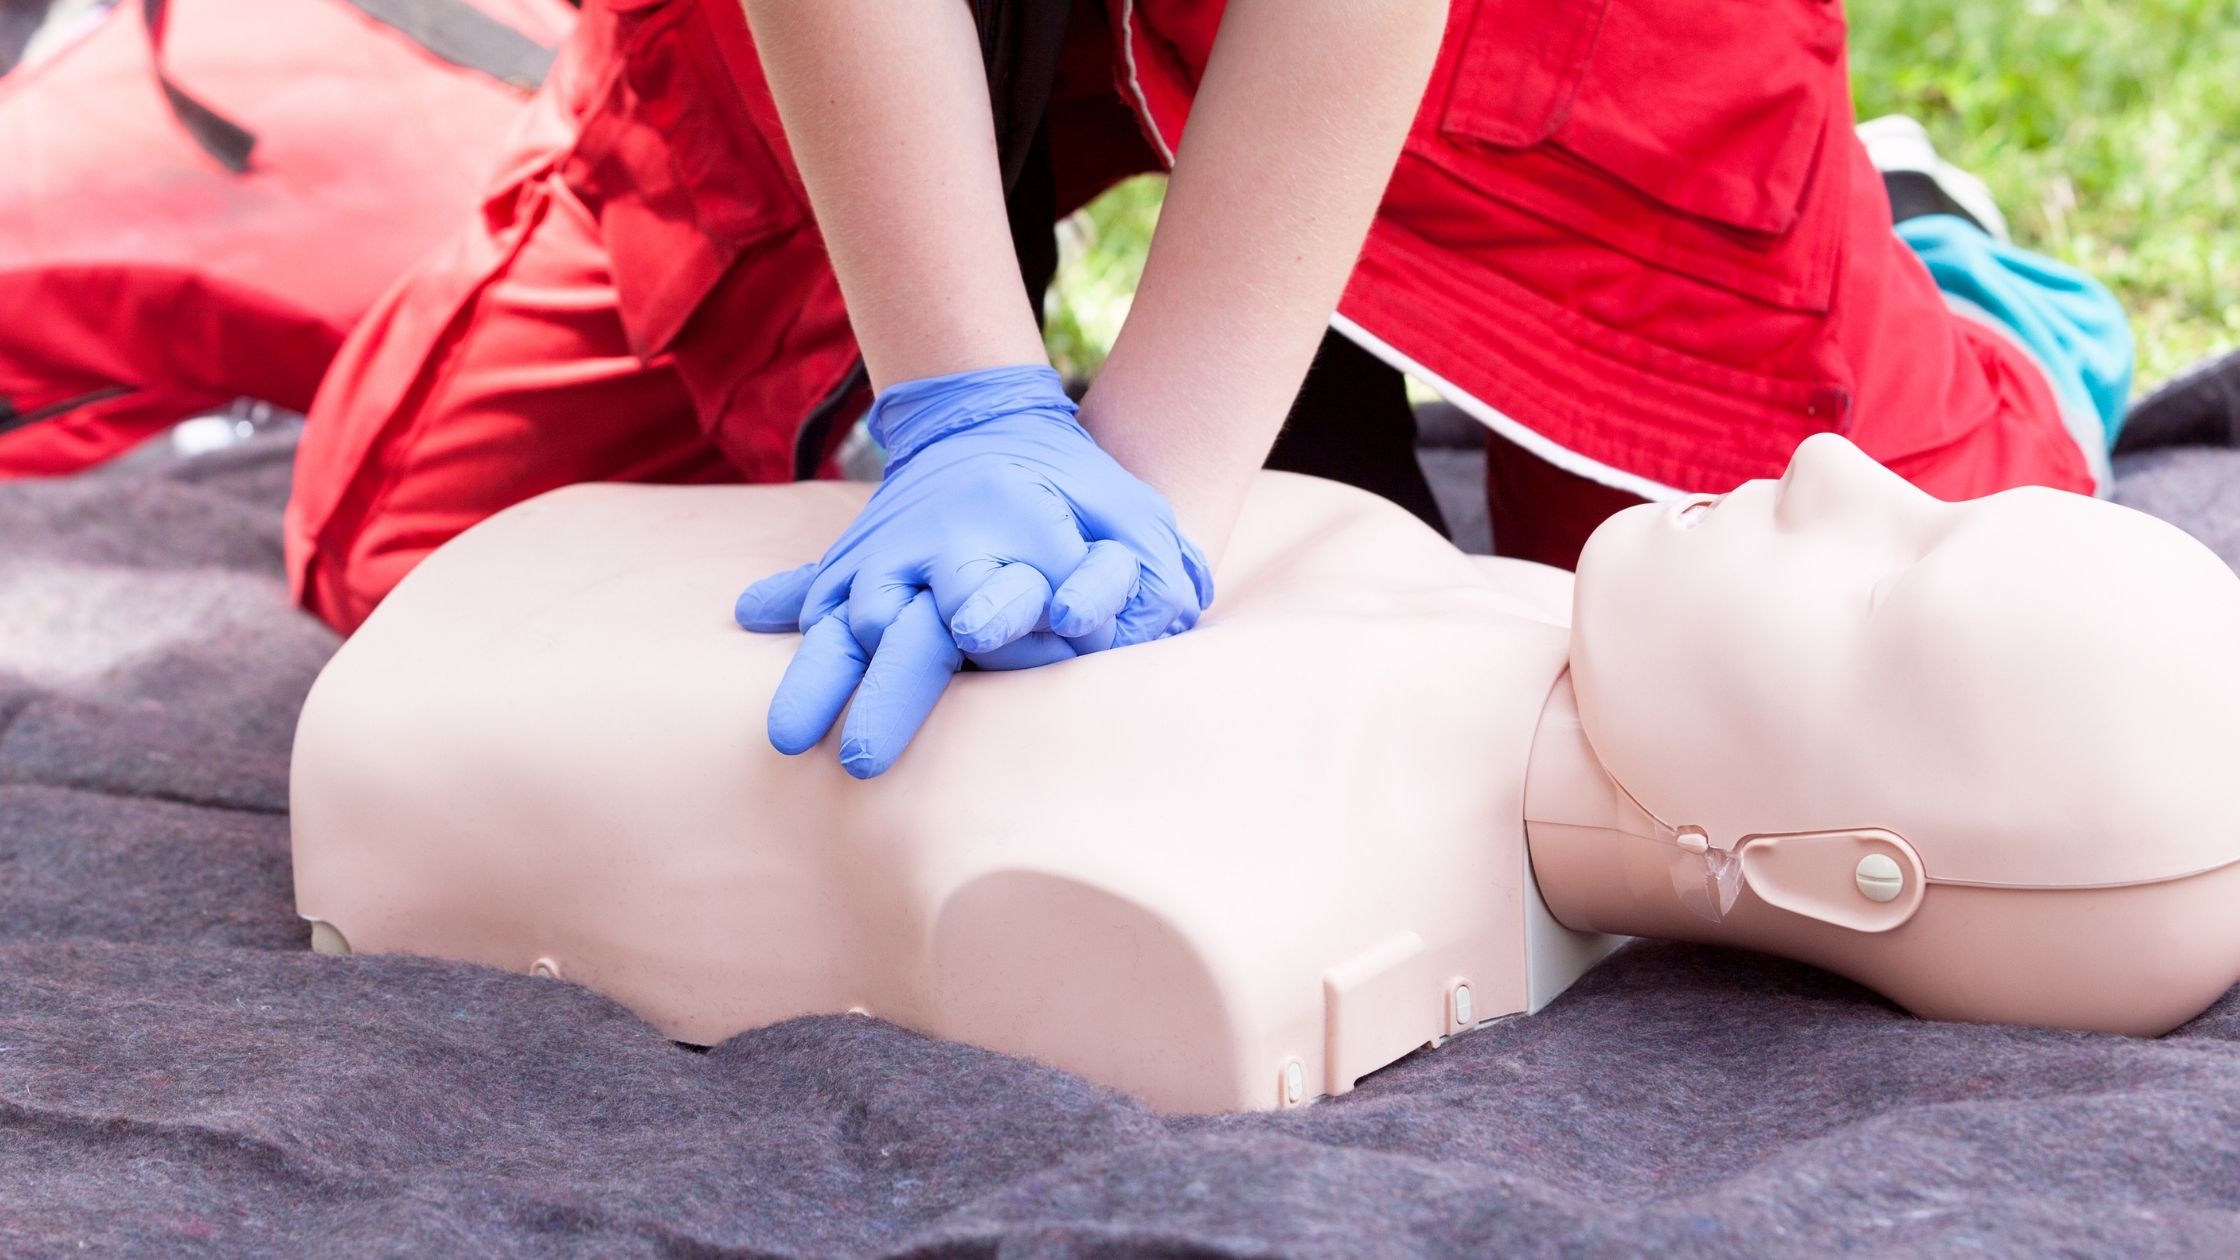 Why is first aid training beneficial for you to learn?